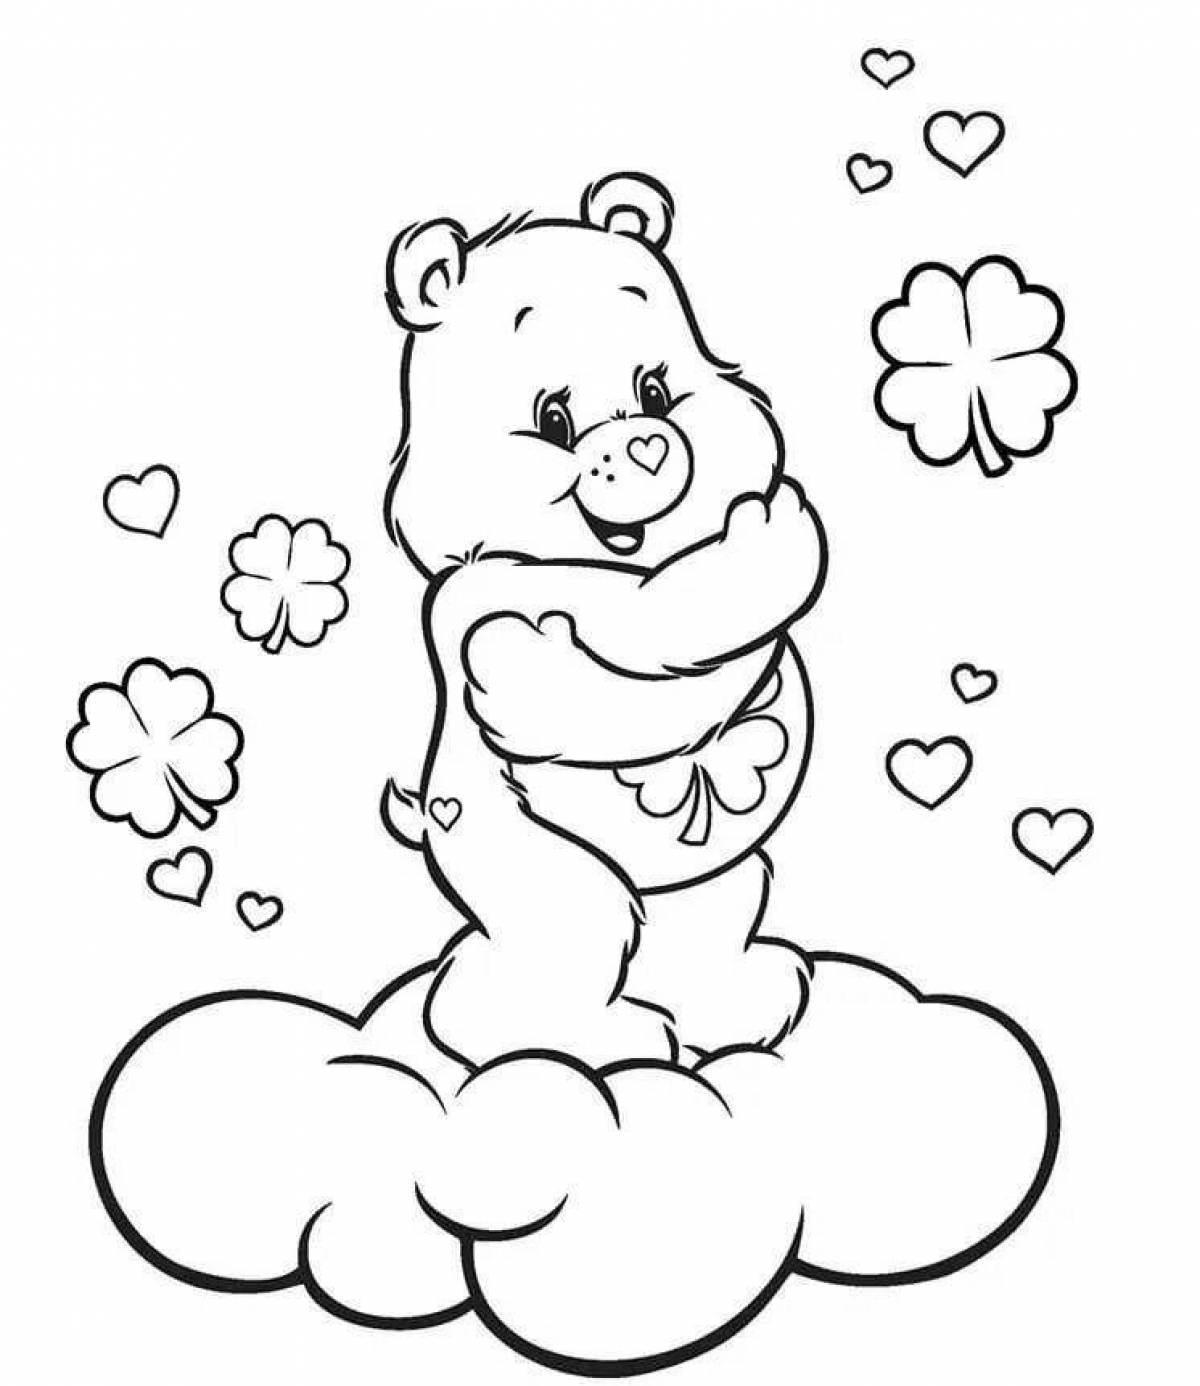 Glitter care bears coloring book